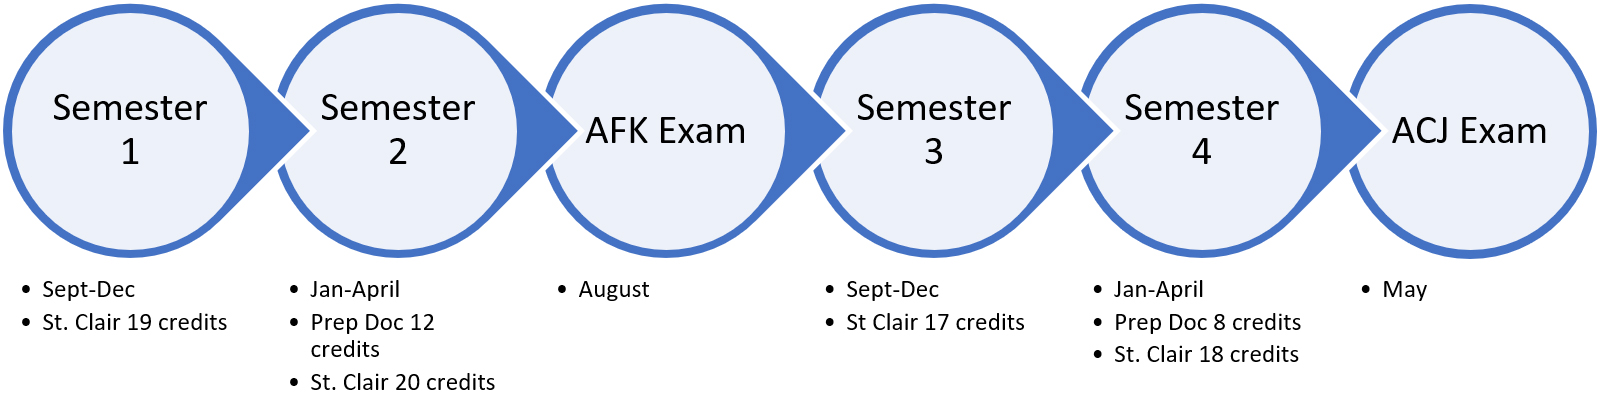 Flowchart showing the semesters and dates for the program.